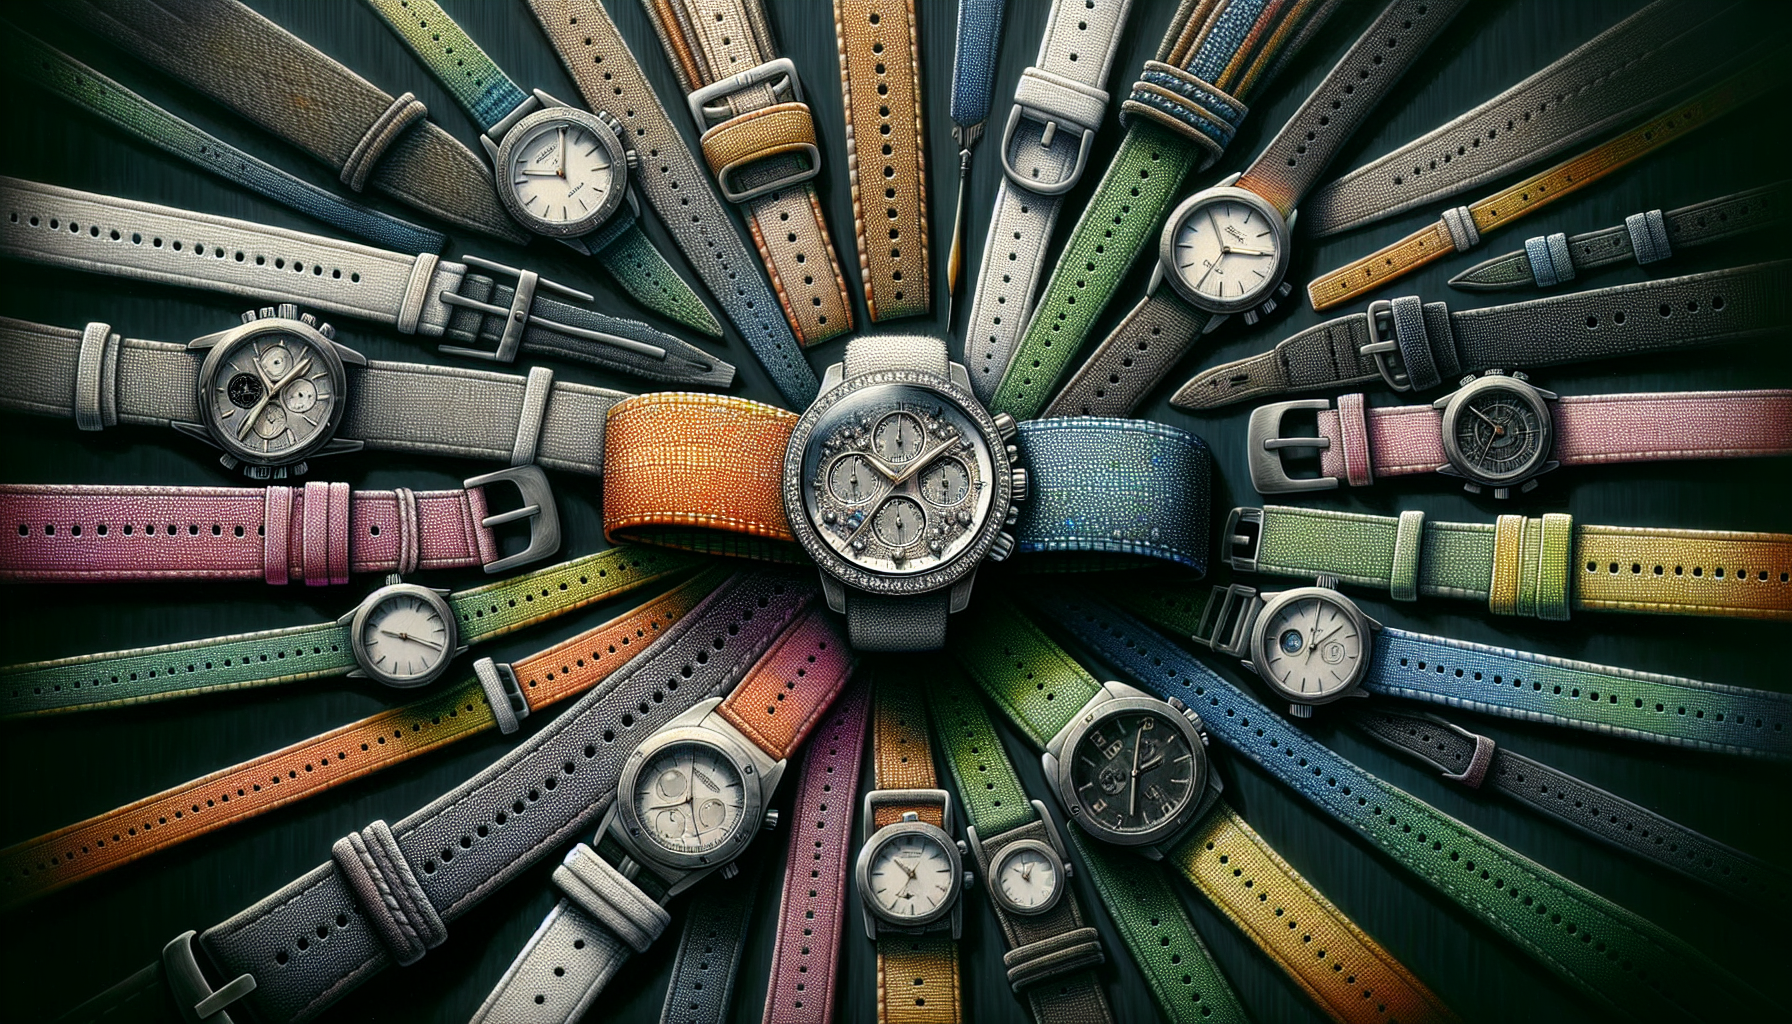 Canvas strap paired with dress, sports, and everyday watches